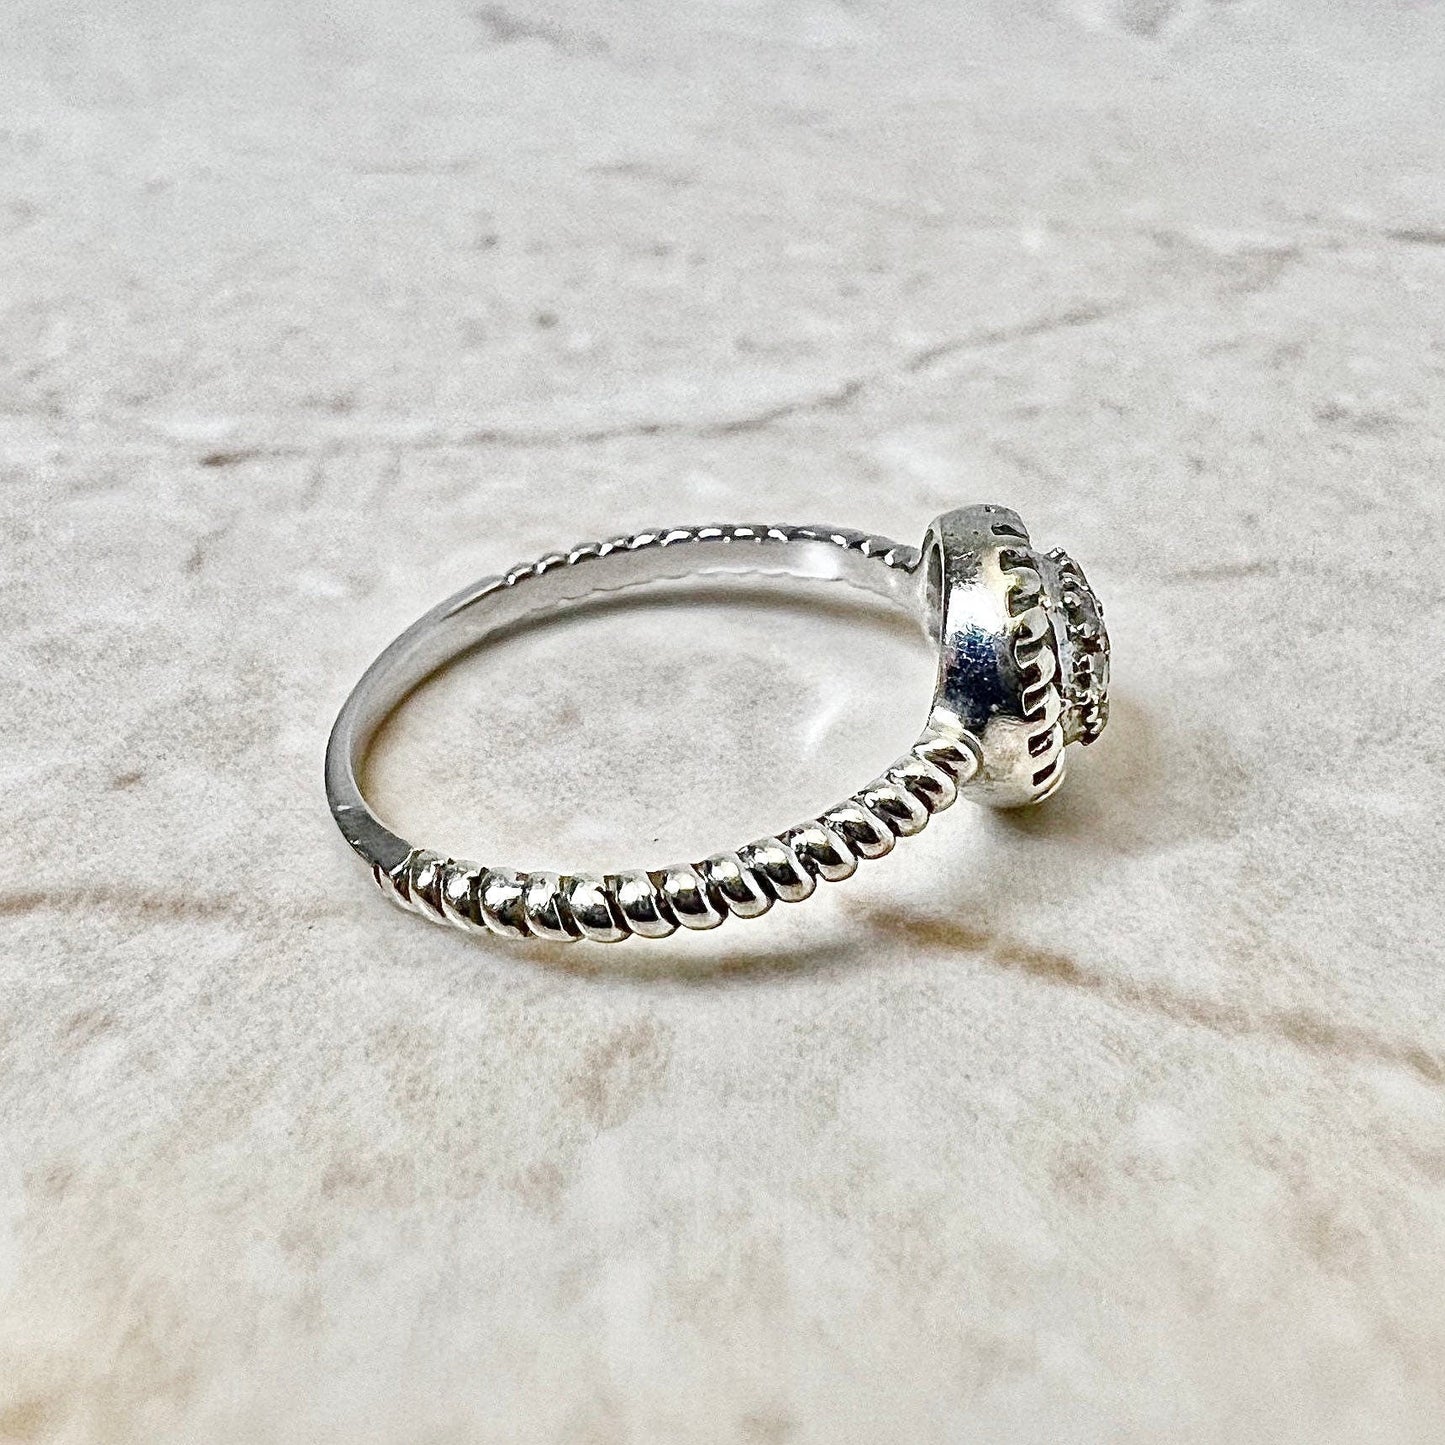 14K Diamond Cluster Ring - White Gold Diamond Ring - Rope Design - Anniversary Ring - Best Gift For Her - Jewelry Sale - Promise Ring